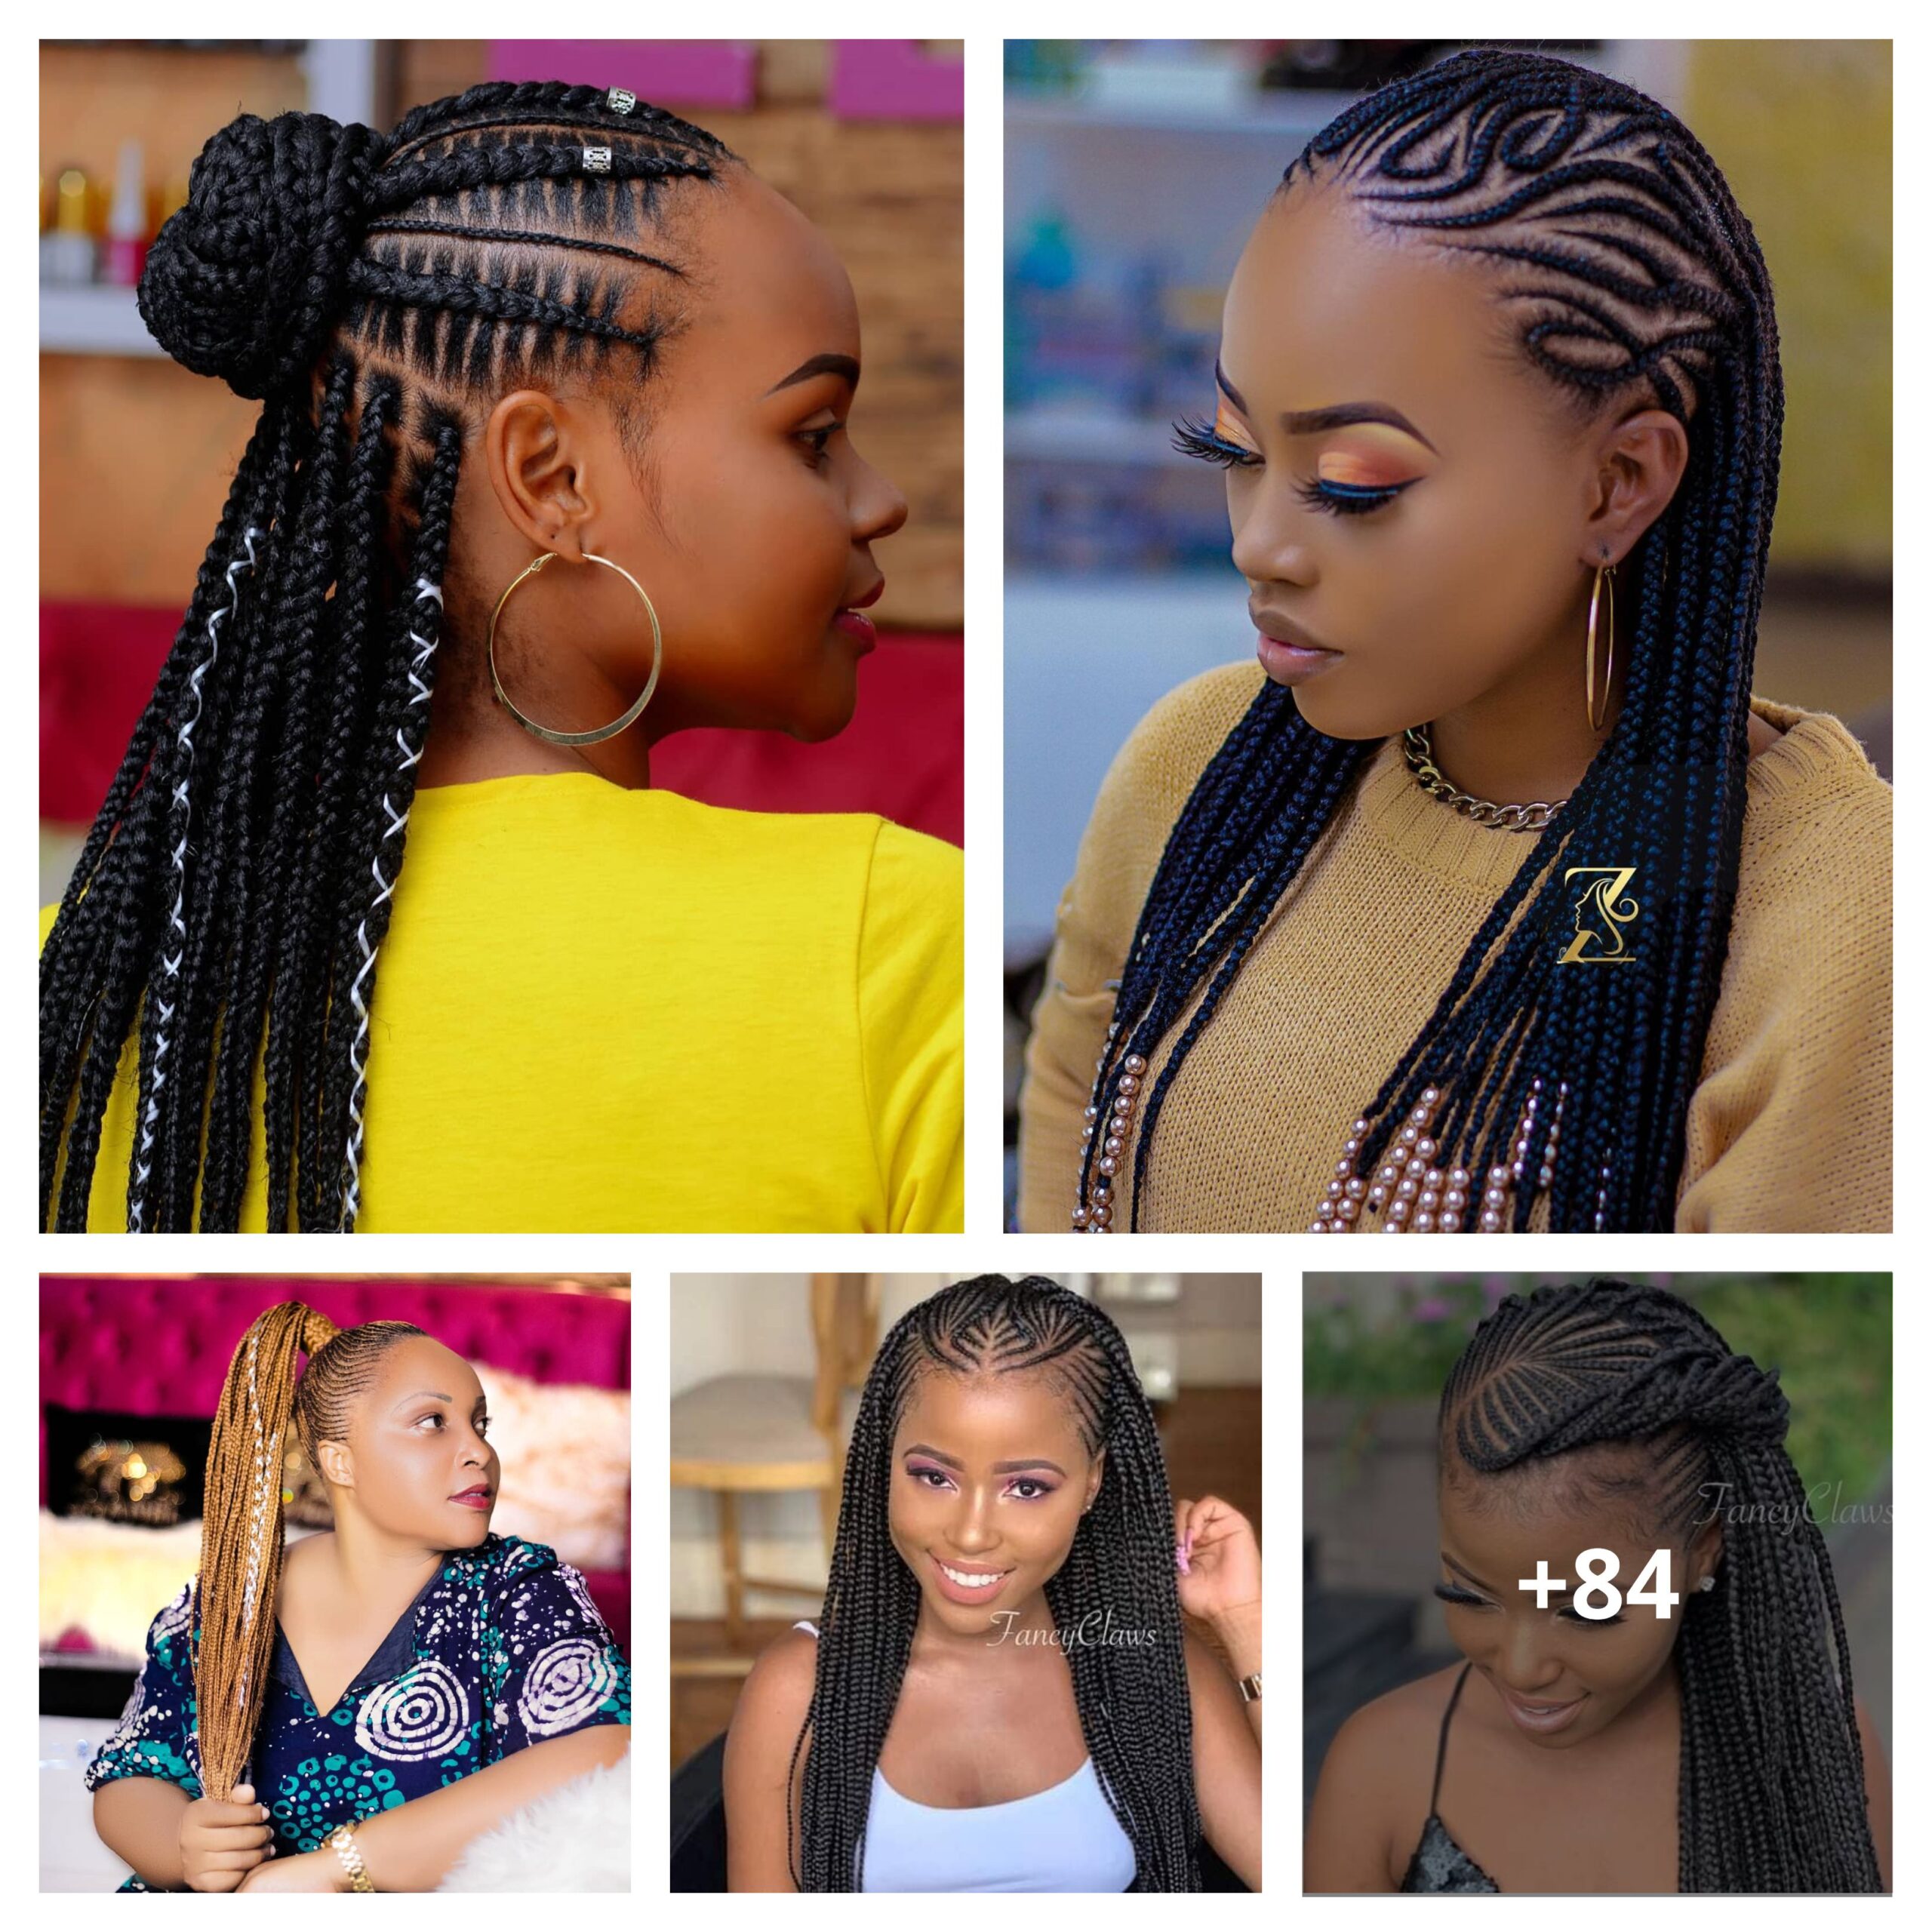 84 Women Hairstyles Ideas That You Can Use Even On Special Days!